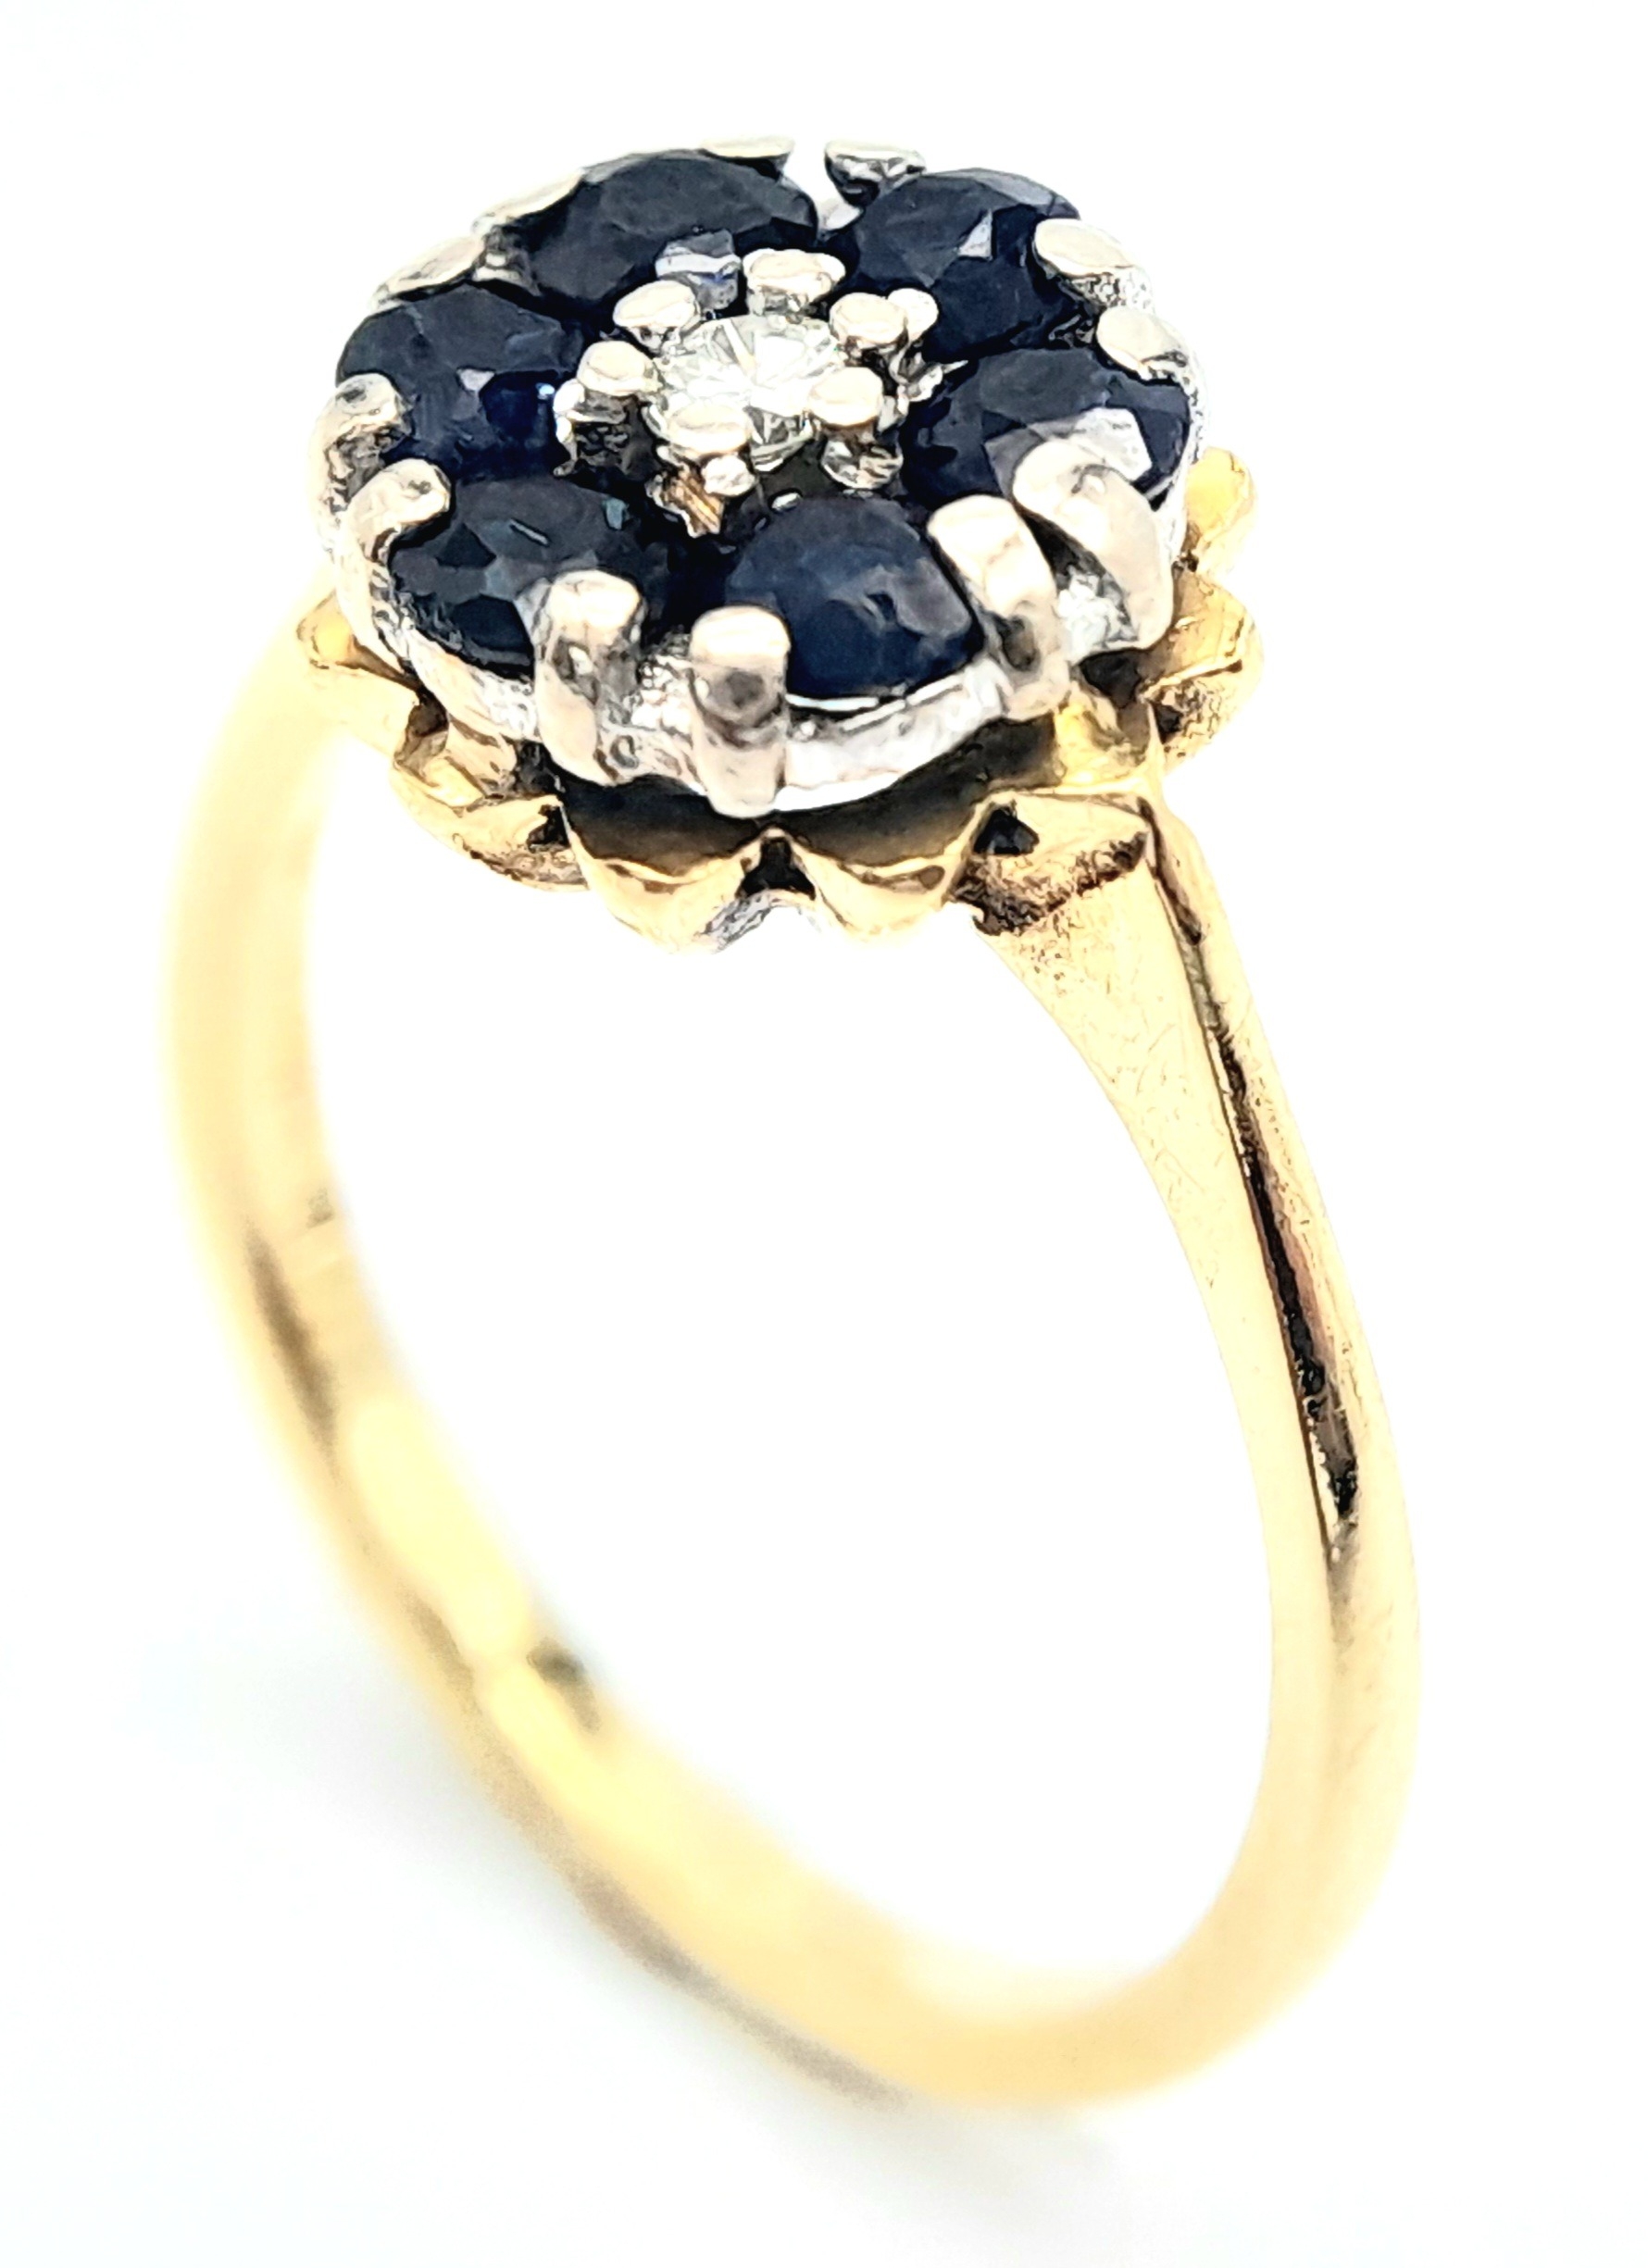 AN 18K YELLOW GOLD VINTAGE DIAMOND & SAPPHIRE RING. Size K, 3.5g total weight. Ref: SC 8070 - Image 3 of 6